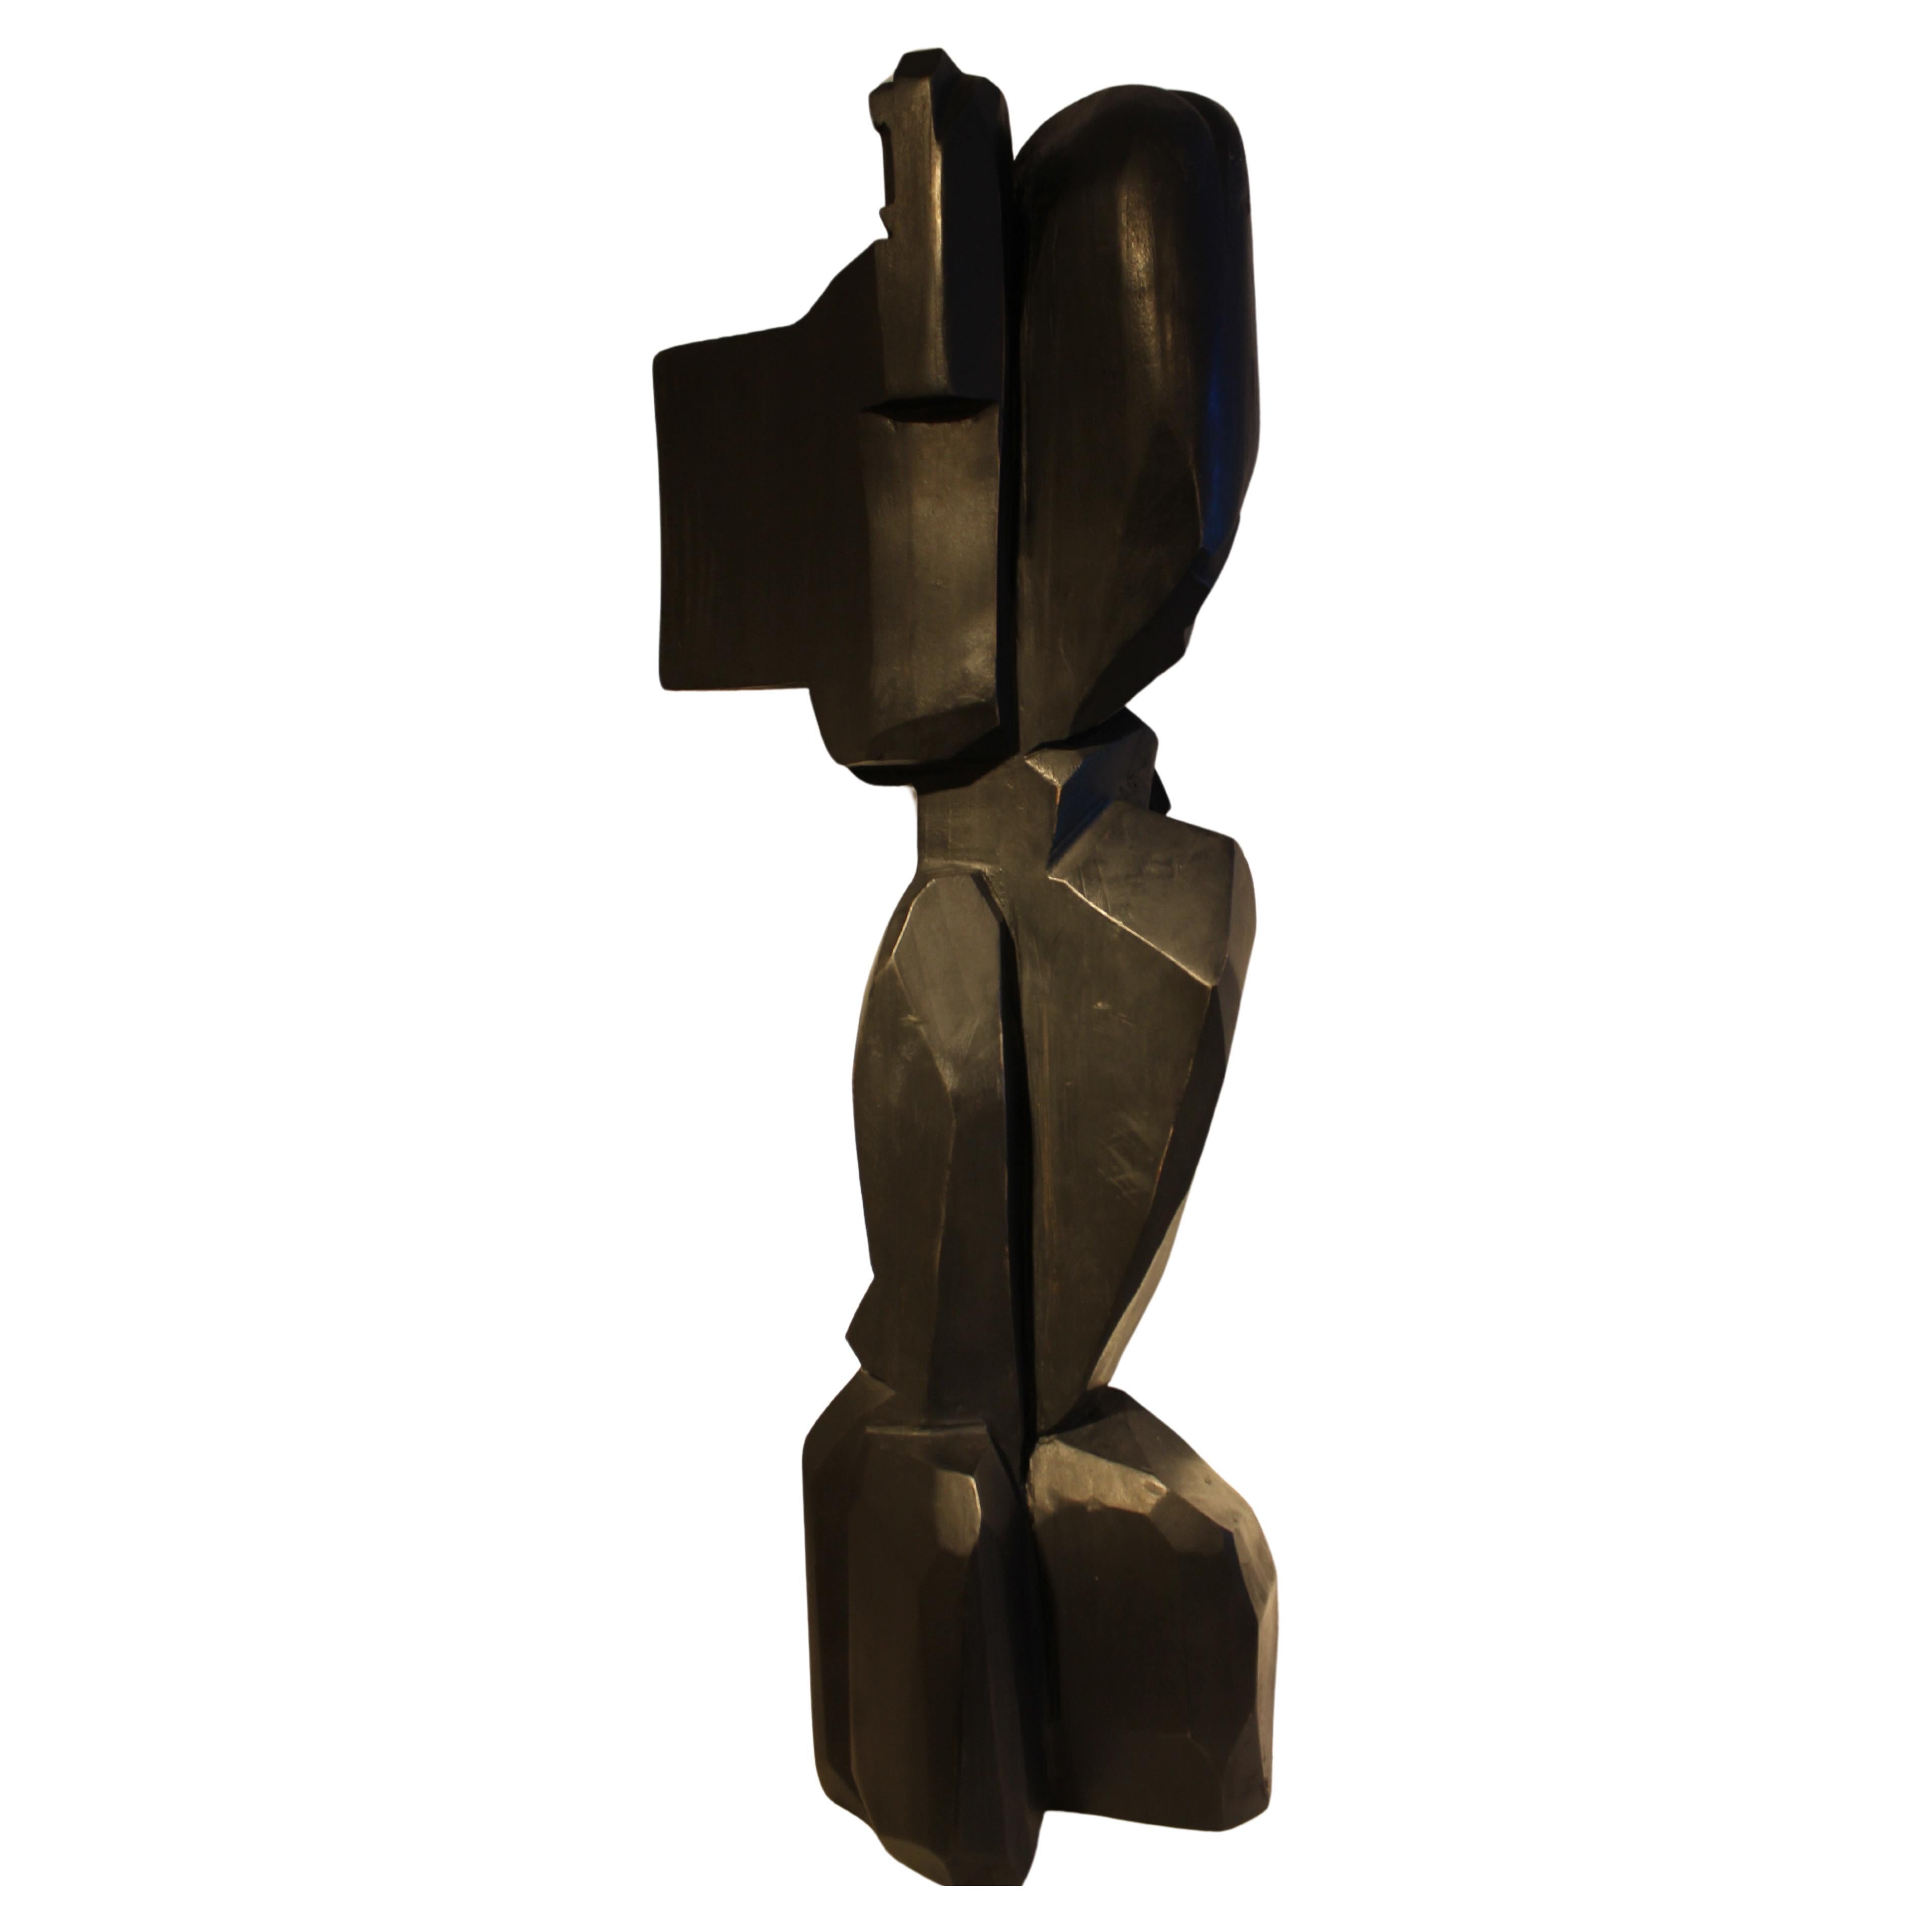 1970 Abstract Wood Sculpture